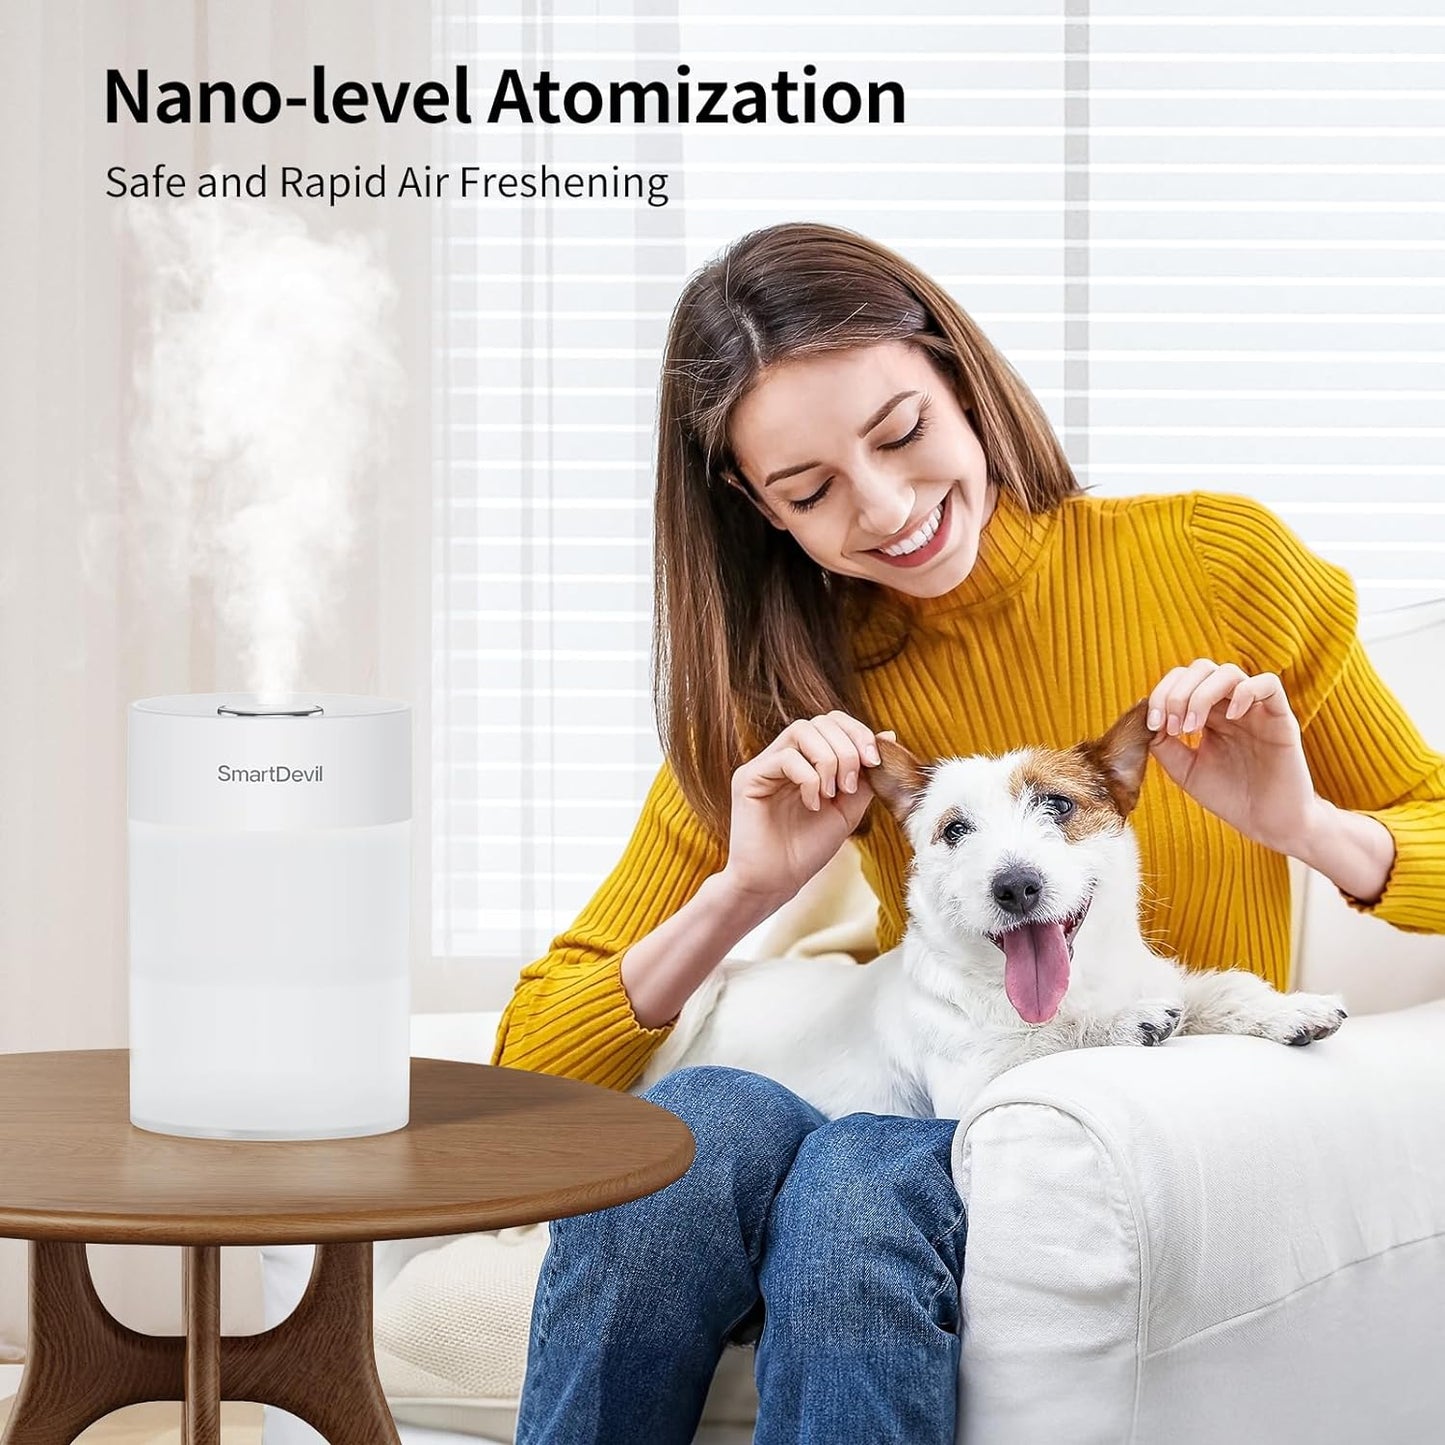 SmartDevil Small Humidifier, 600ml Portable Mini Humidifier, USB Personal Desk Humidifier for Bedroom, Plants, Office, Travel, Nightstand with Night Light, Auto Shut-Off, Super Quiet, White